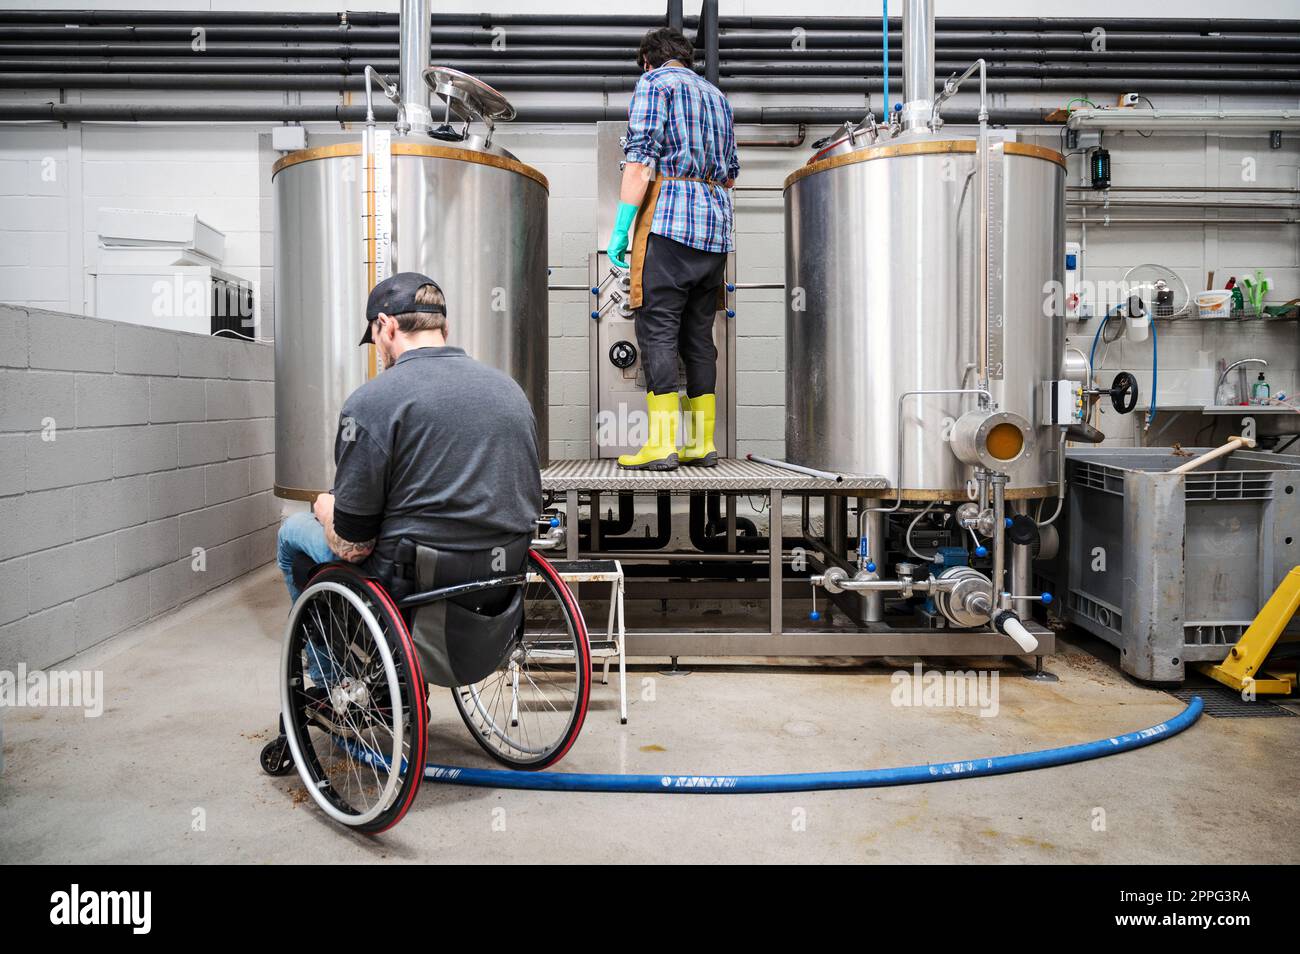 Person with disability who uses a wheelchair working at craft beer factory. Stock Photo